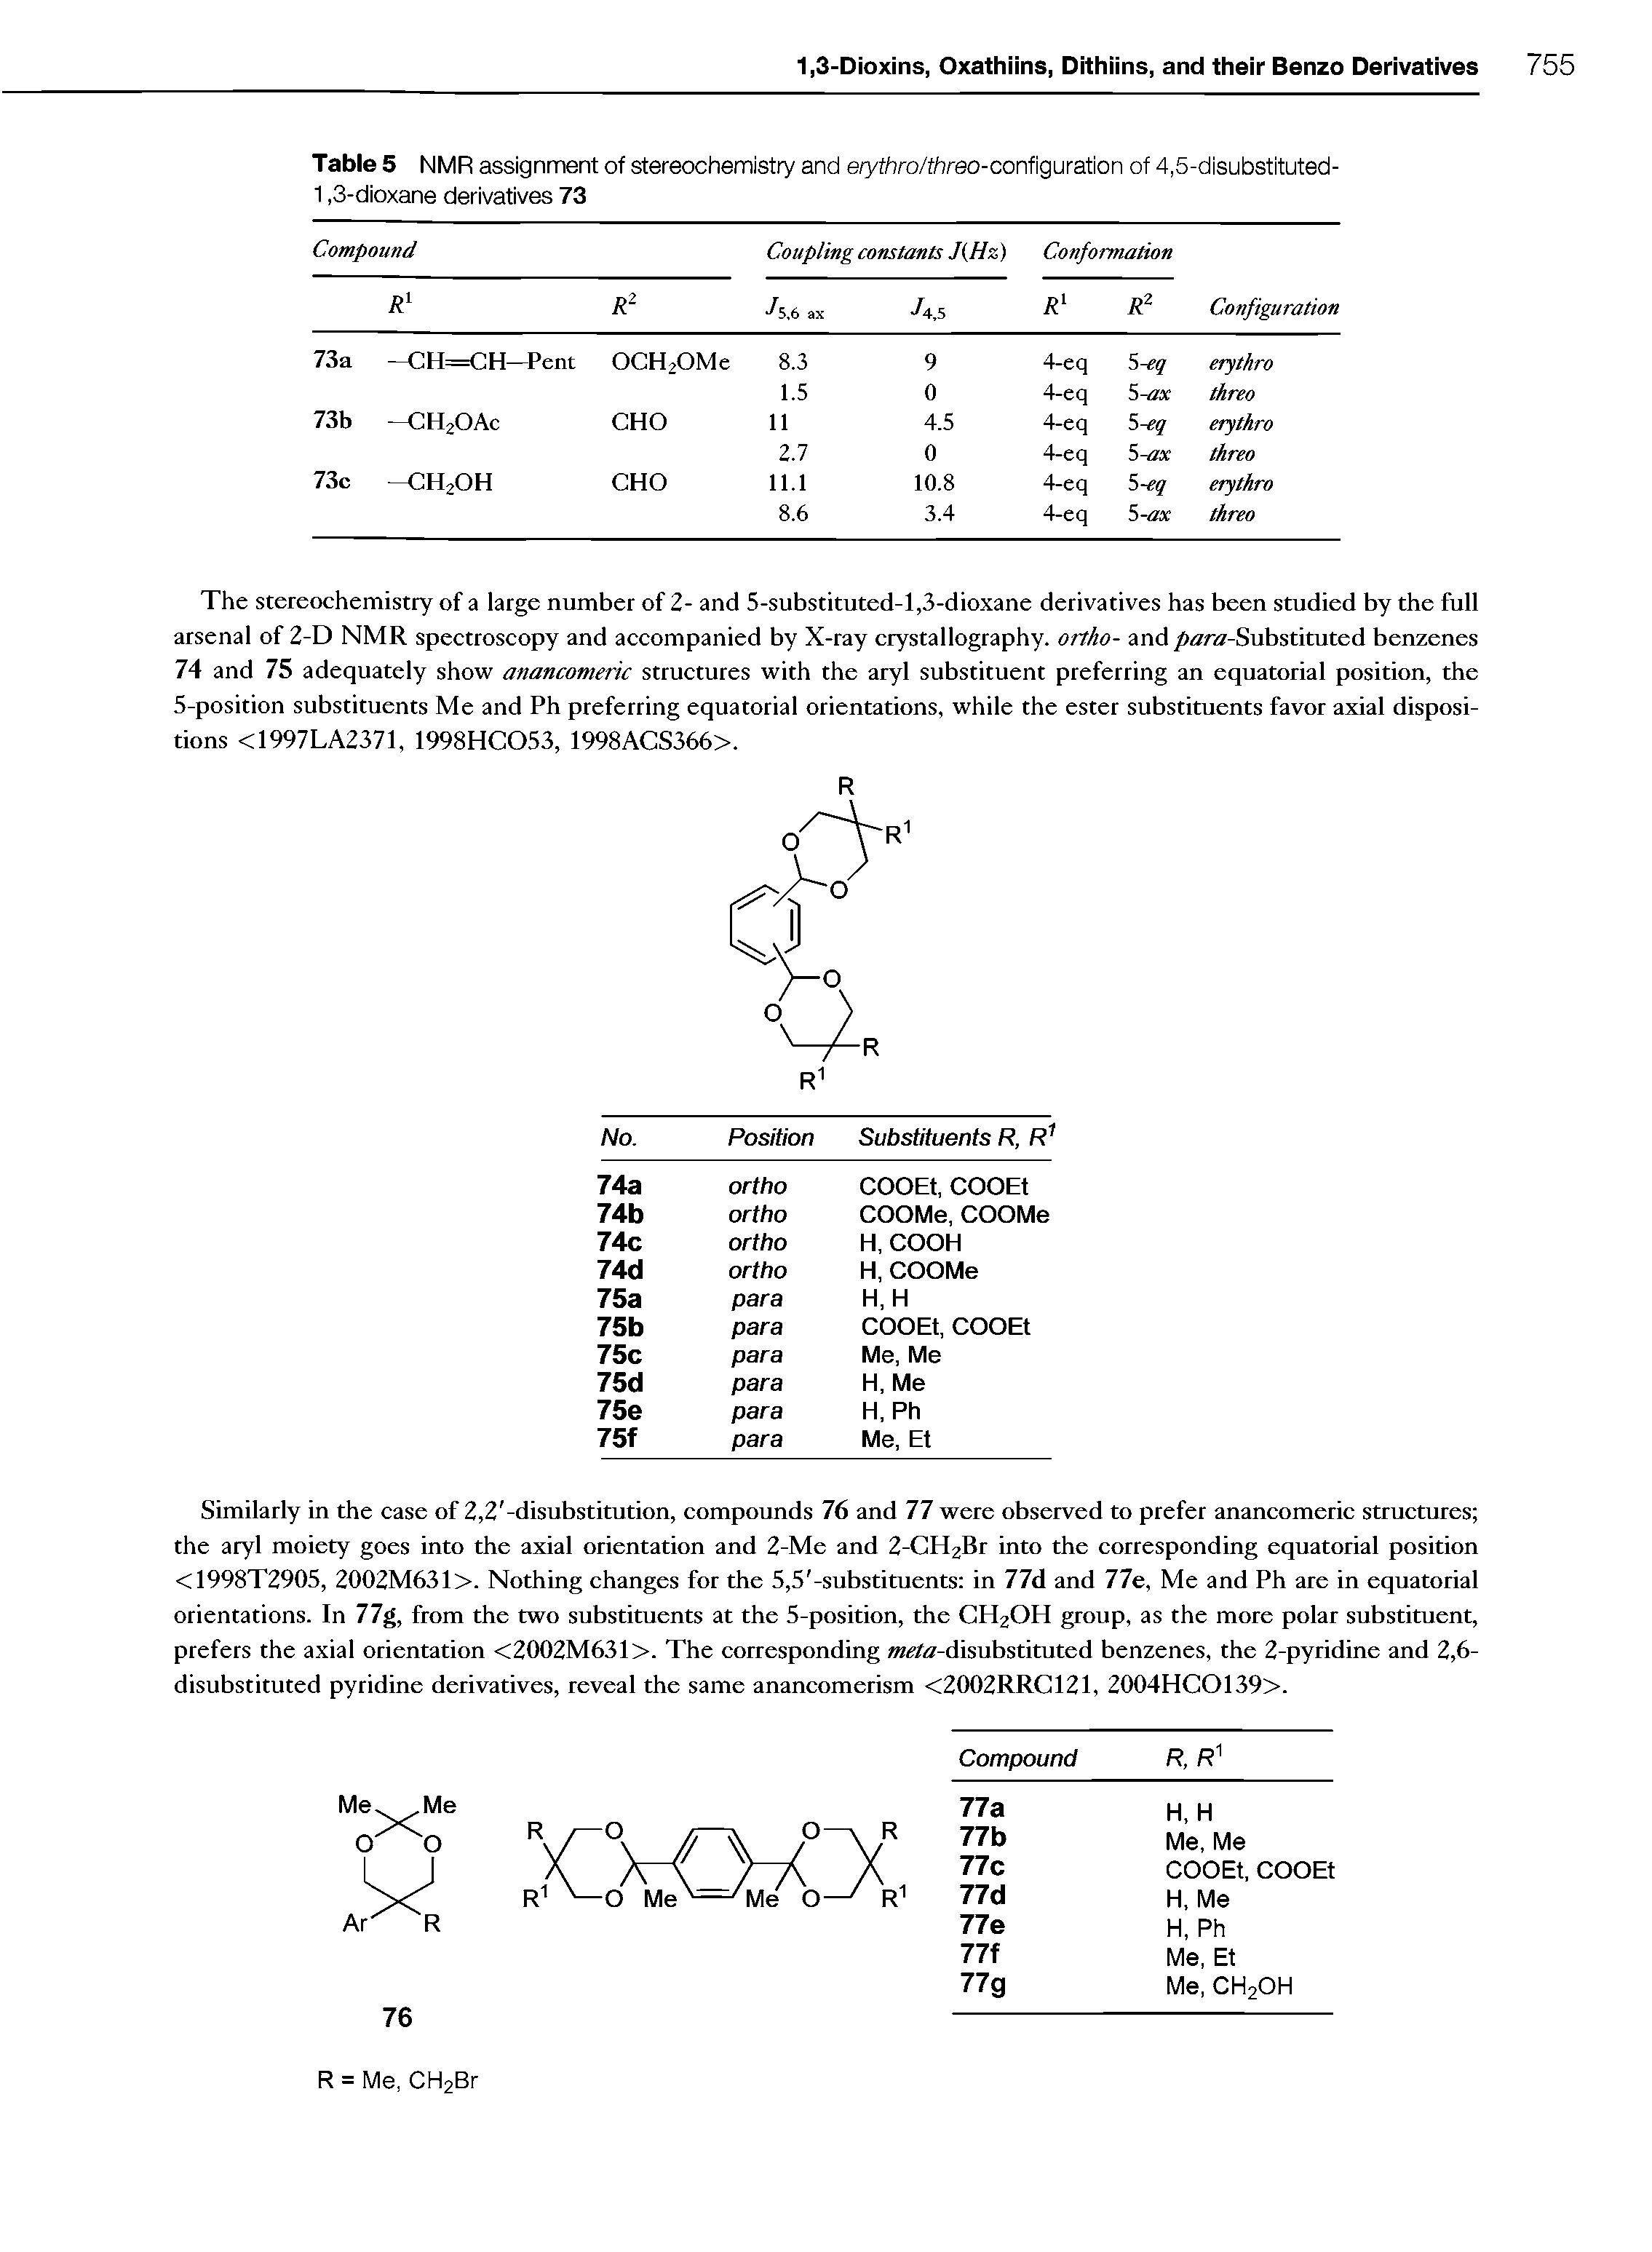 Table 5 NMR assignment of stereochemistry and erythro/threo-conf gurat on of 4,5-disubstituted-1,3-dioxane derivatives 73...